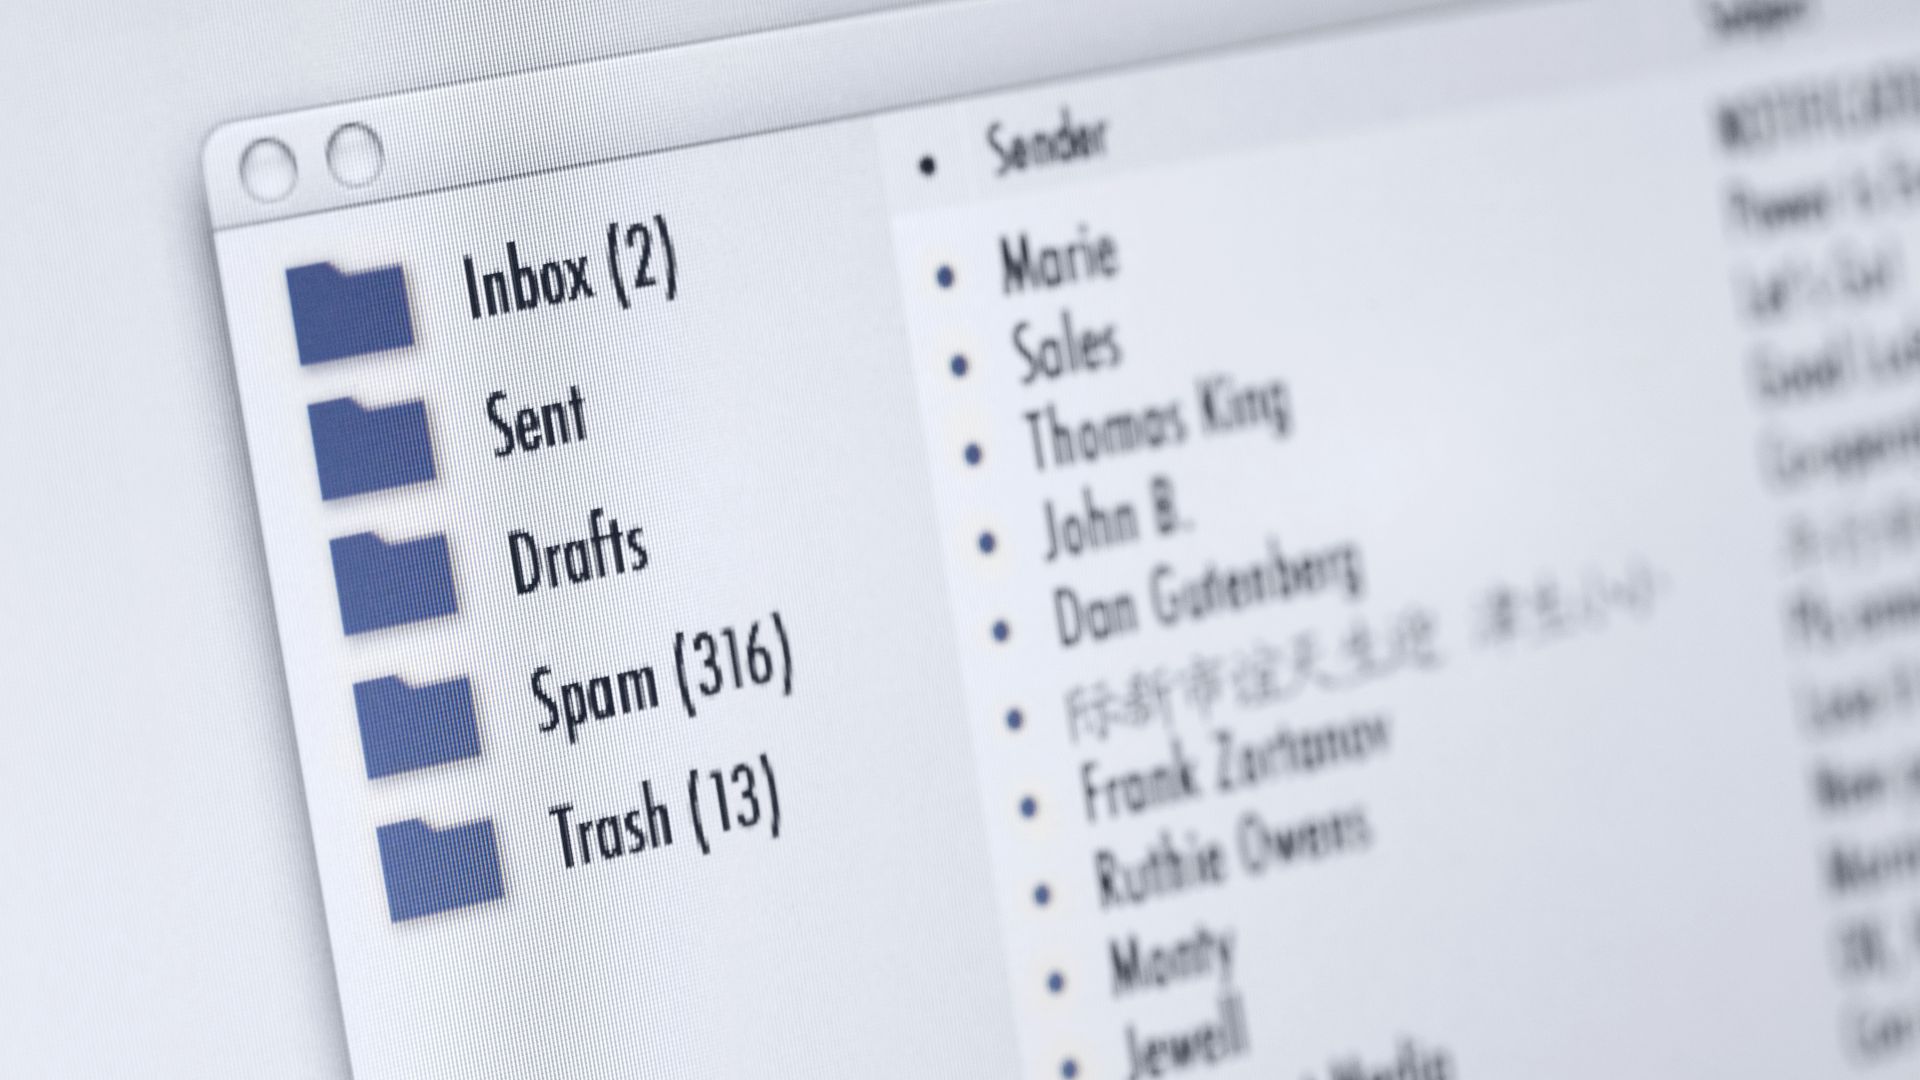 Image of email inbox on a computer screen